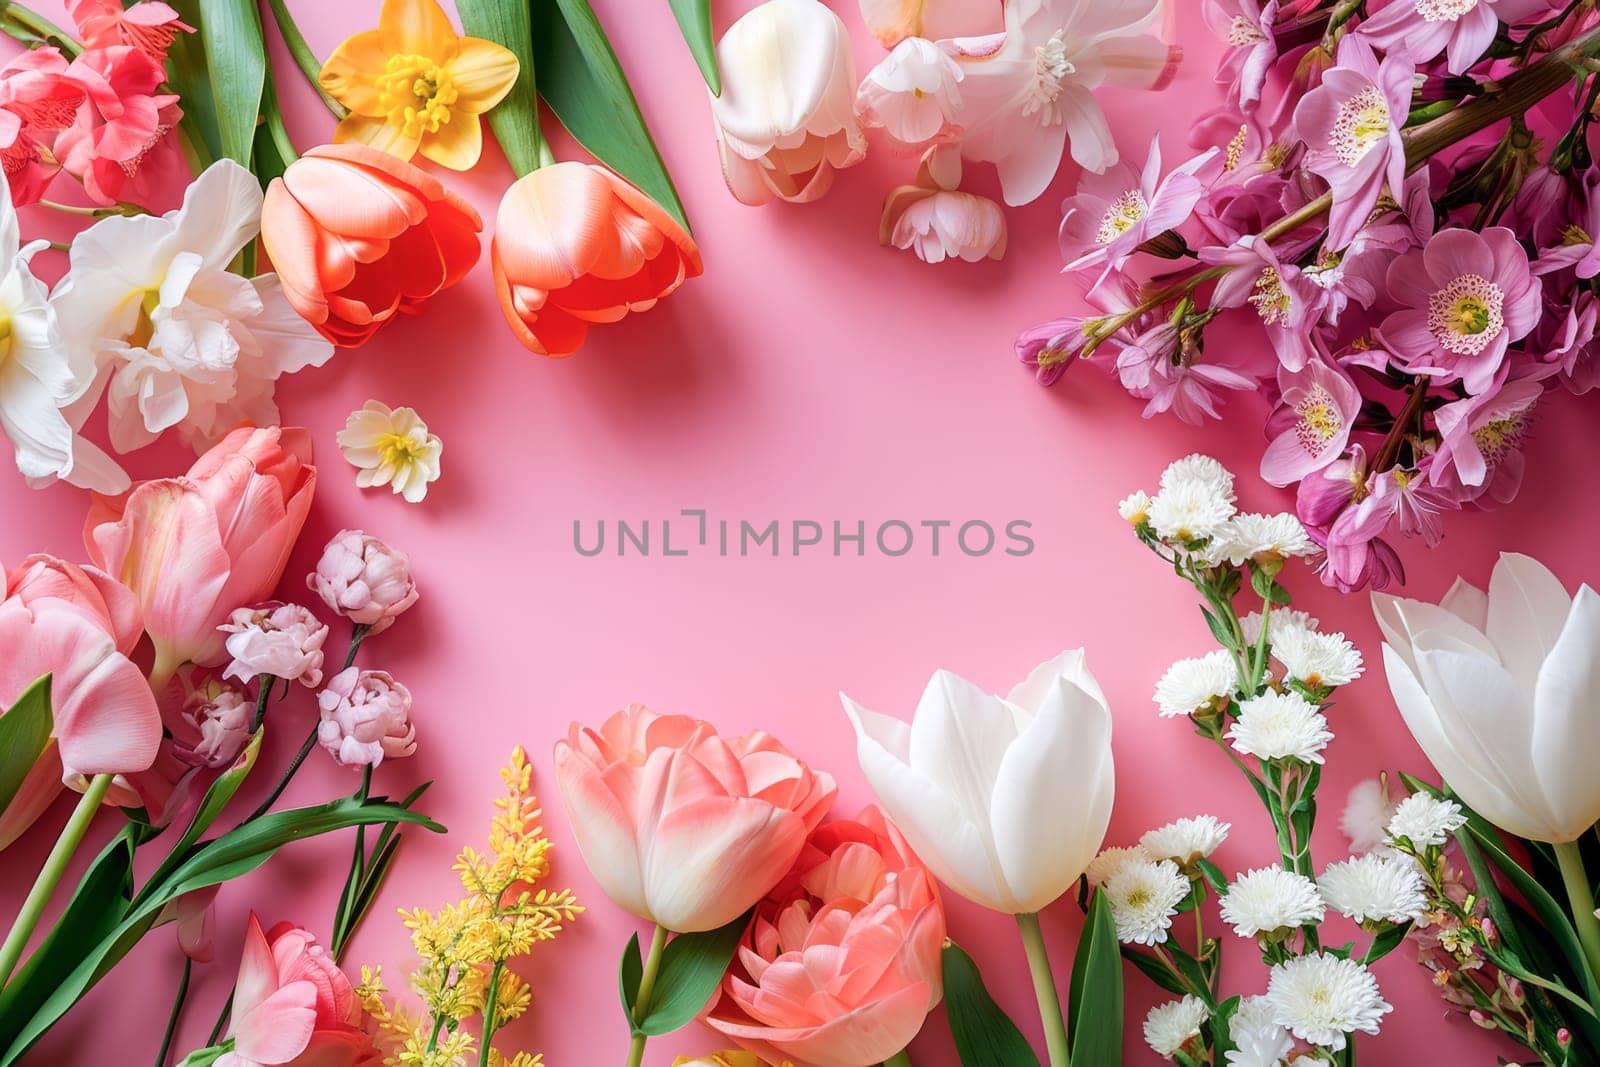 Colorful Flowers Arrangement on a Pink Background by vladimka